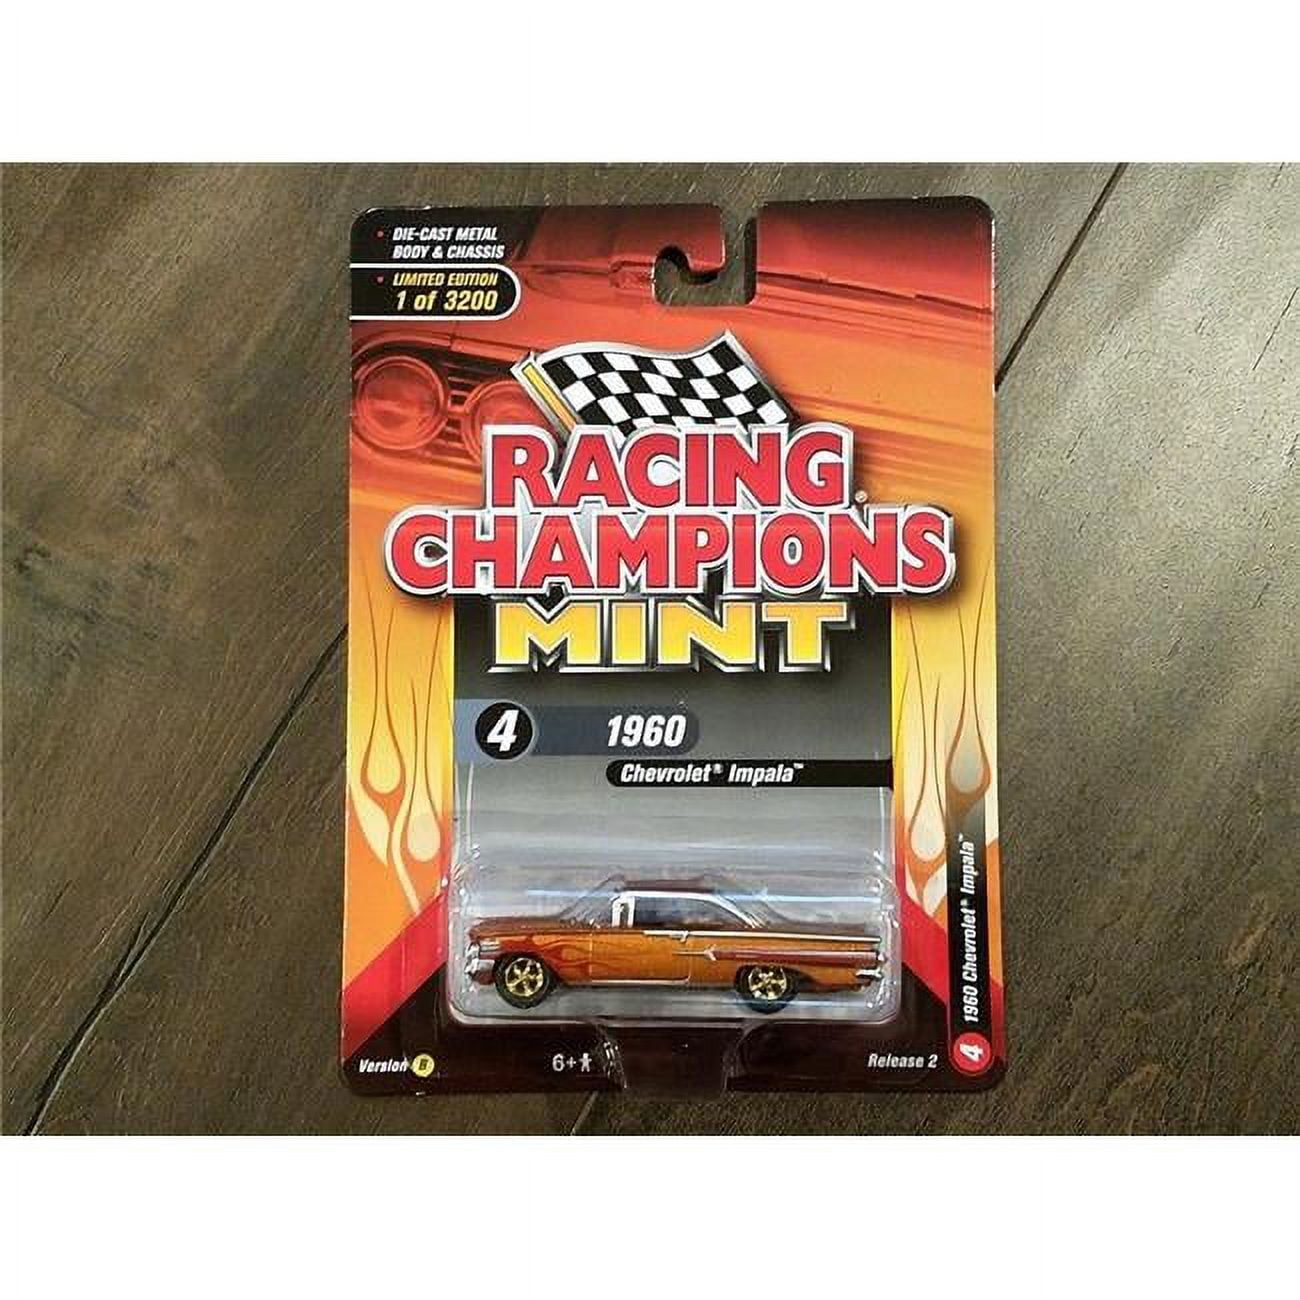 Rc008-rcsp007 1-64 Scale 1960 Chevrolet Impala Diecast Car - Orange With Red Flames - Limited Edition